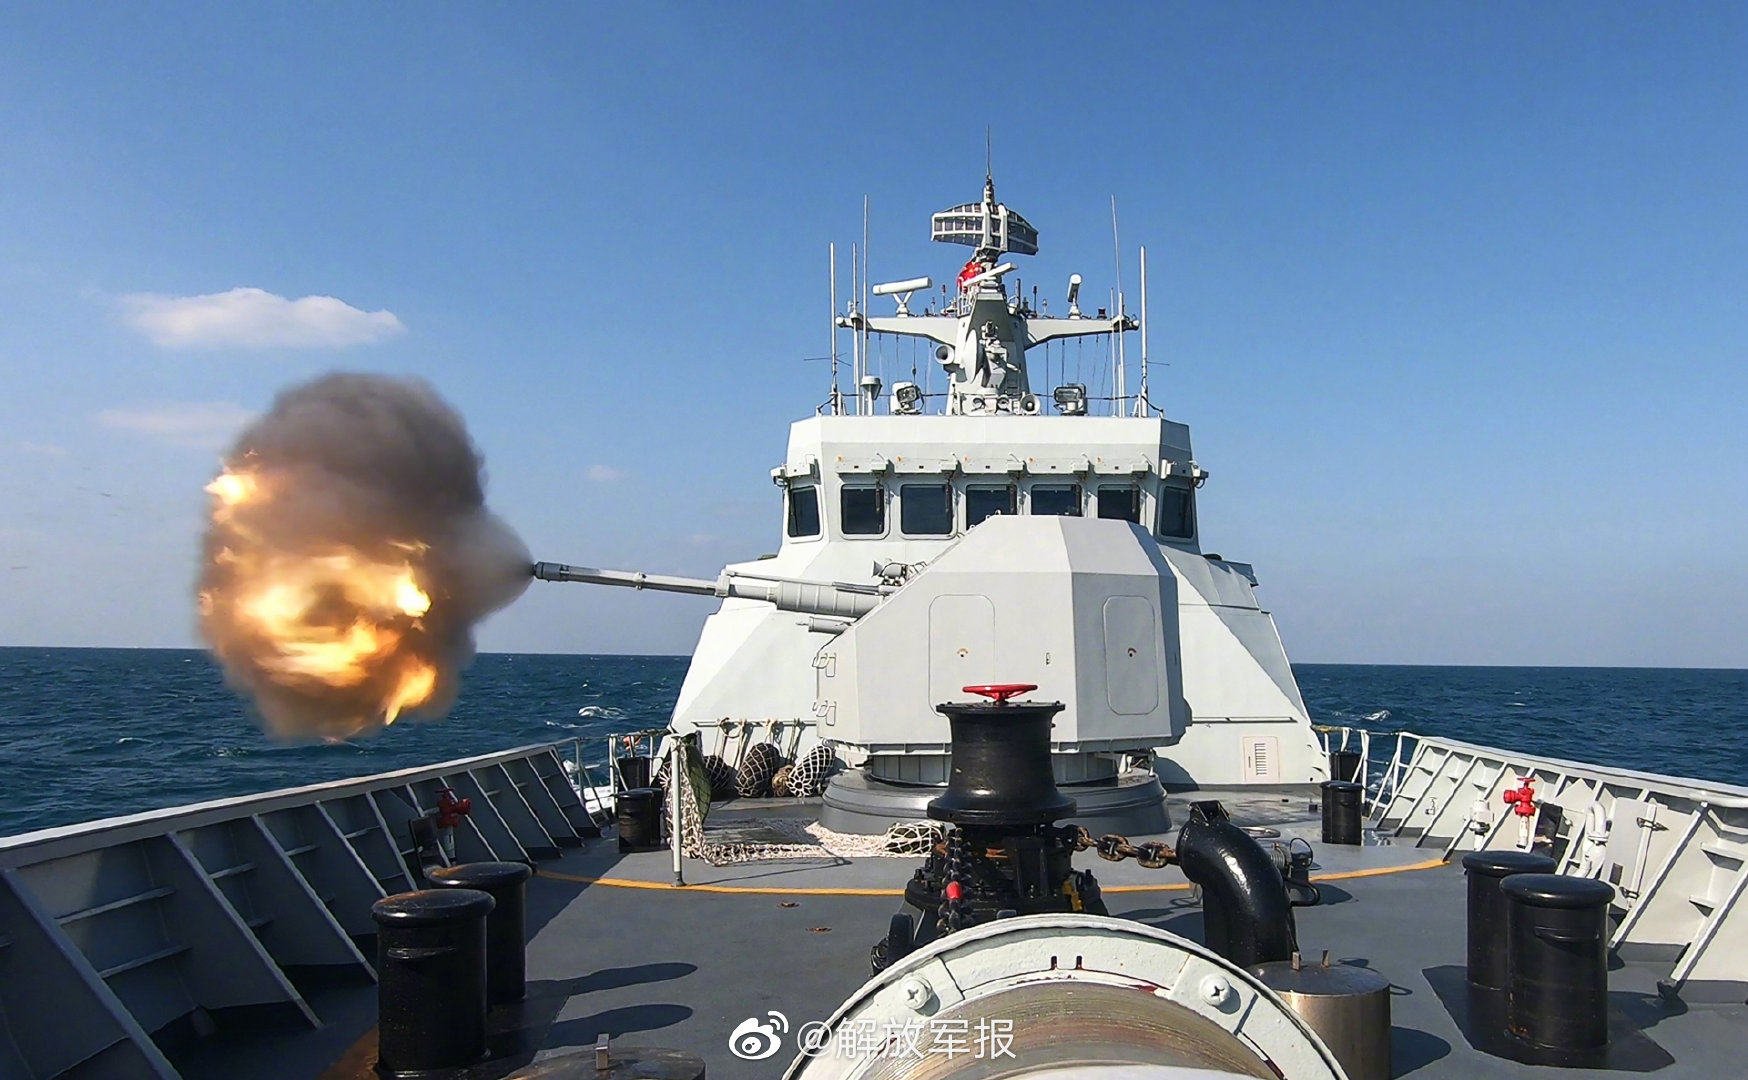 A live-fire drill carried out by the People’s Liberation Army in 2021 in the Gulf of Tonkin, referred to as “Beibu Gulf” by Beijing. Photo: Weibo / PLA